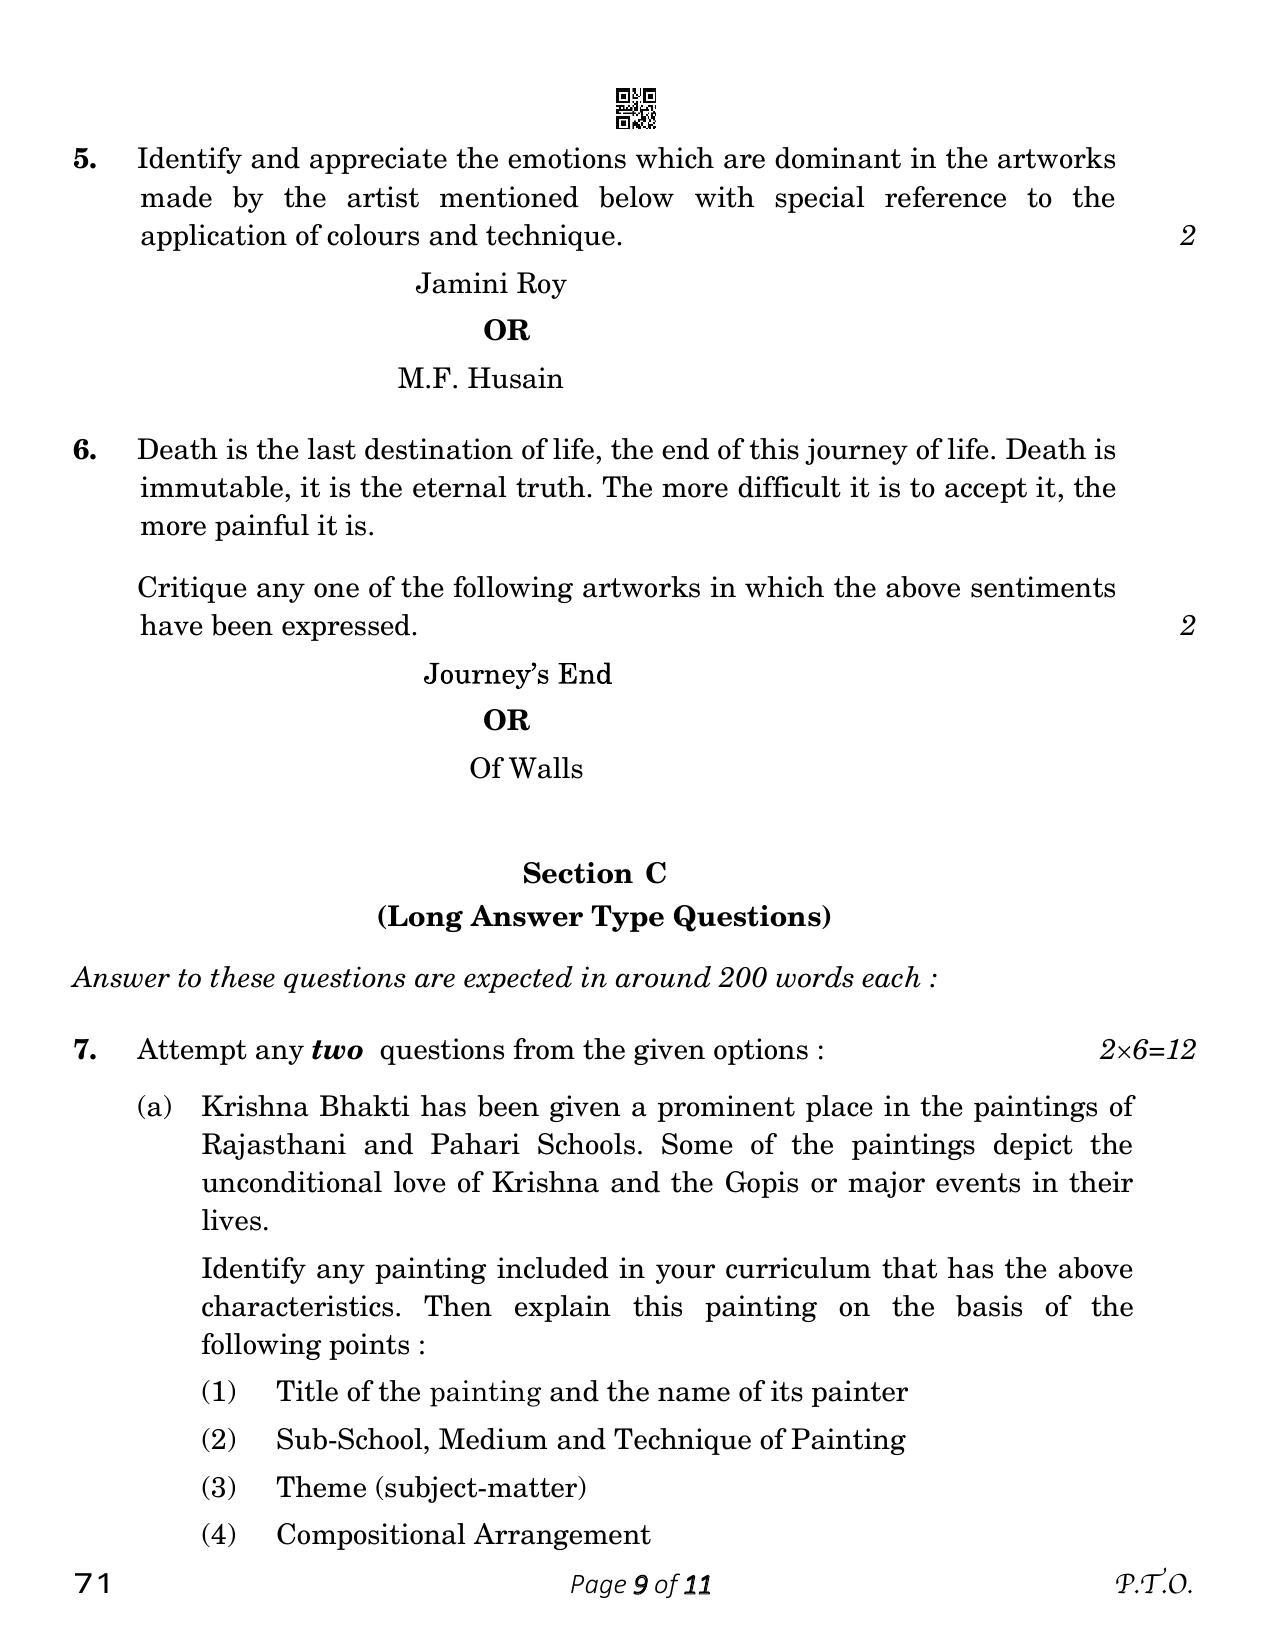 CBSE Class 12 Painting (Compartment) 2023 Question Paper - Page 9